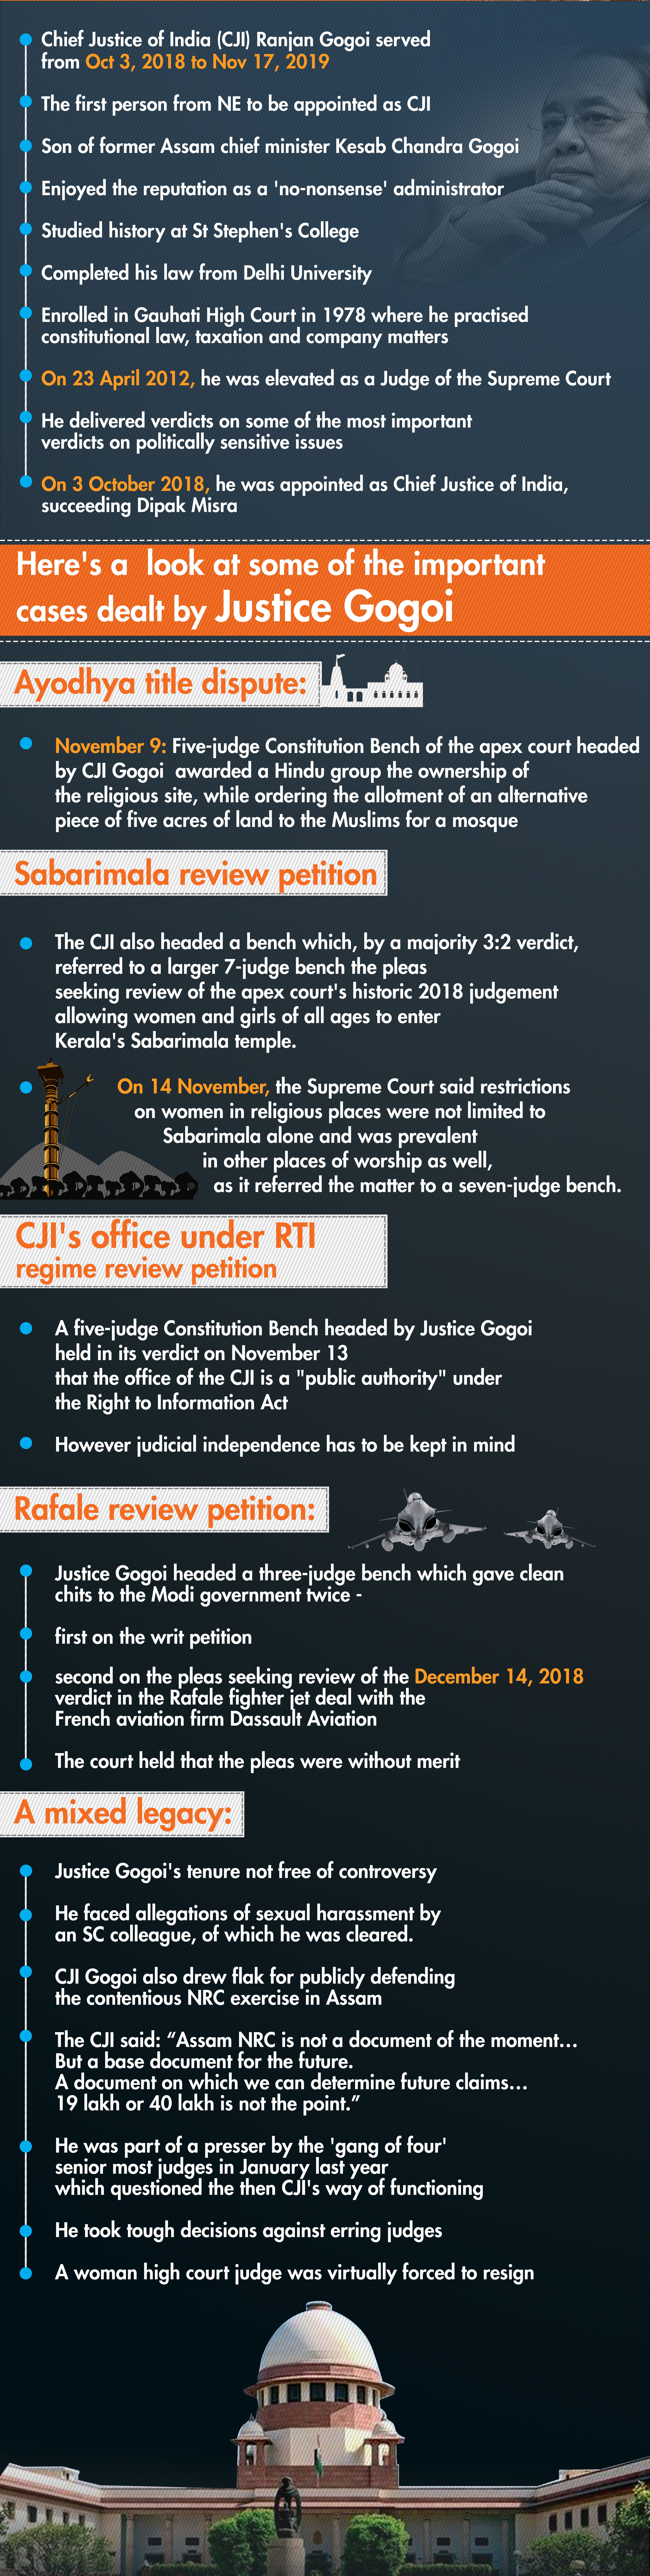 Throwback of former CJI Ranjan Gogoi achievements and controversies